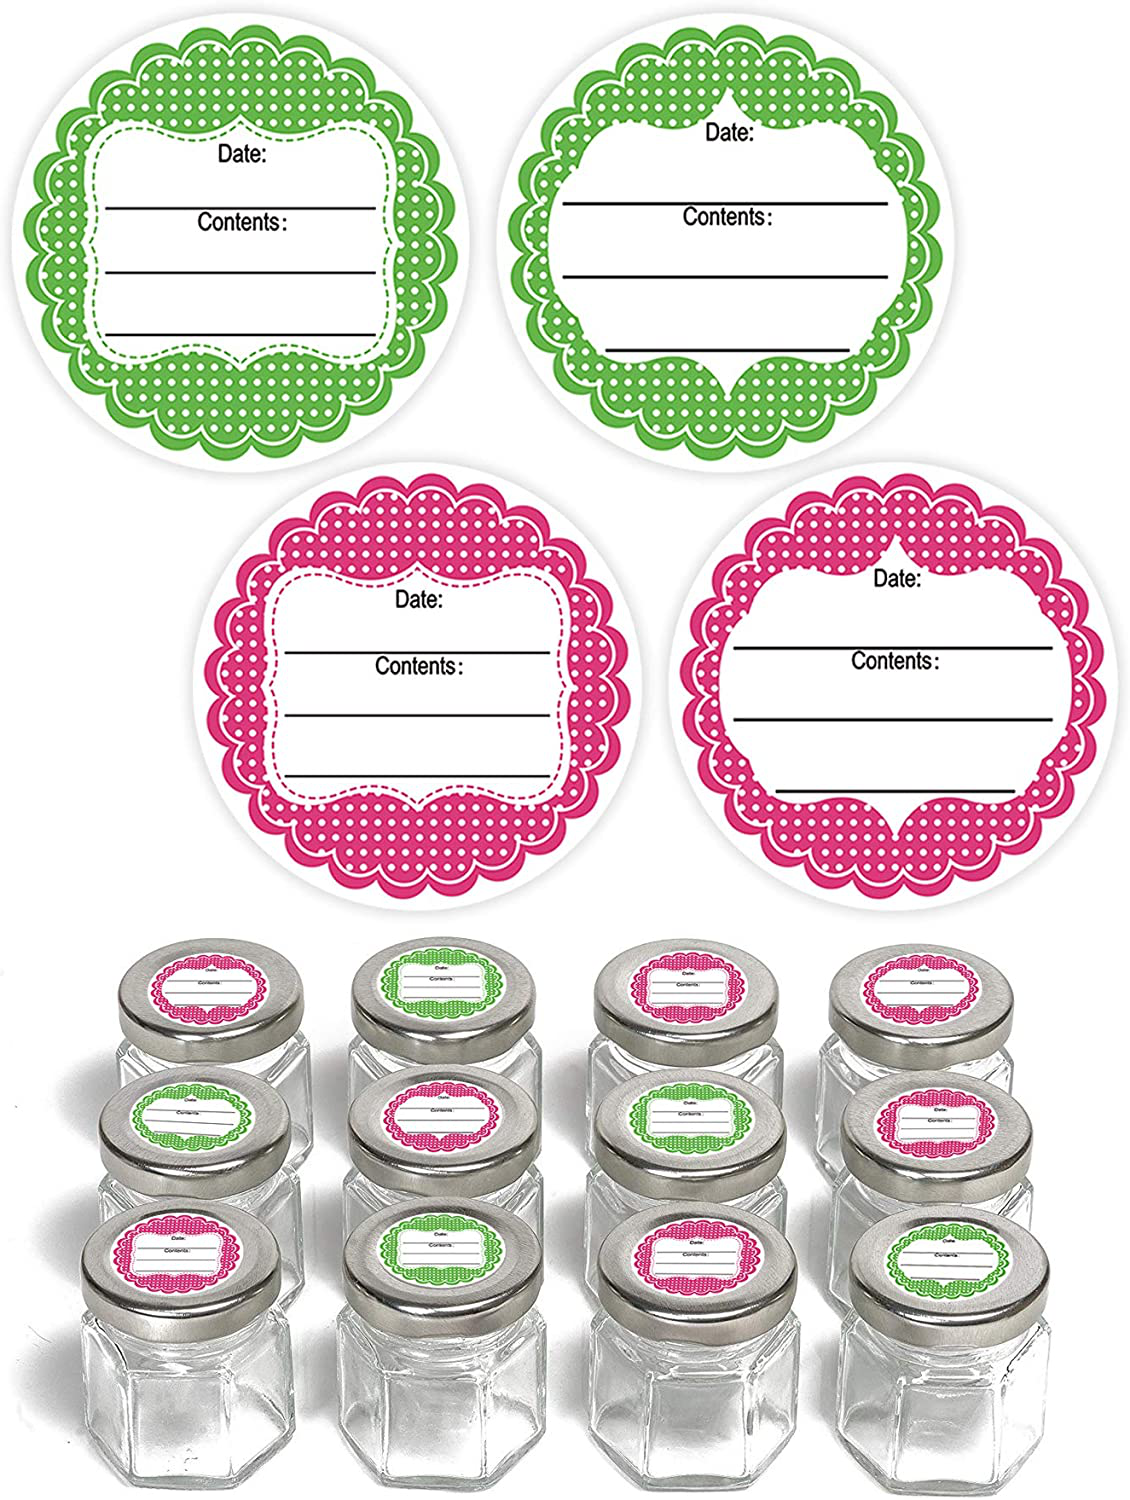 2 Inch Round Canning Labels,Containers Labels,Labels for Mason Jar,Bottles,Writable Food Stickers,Set of 80